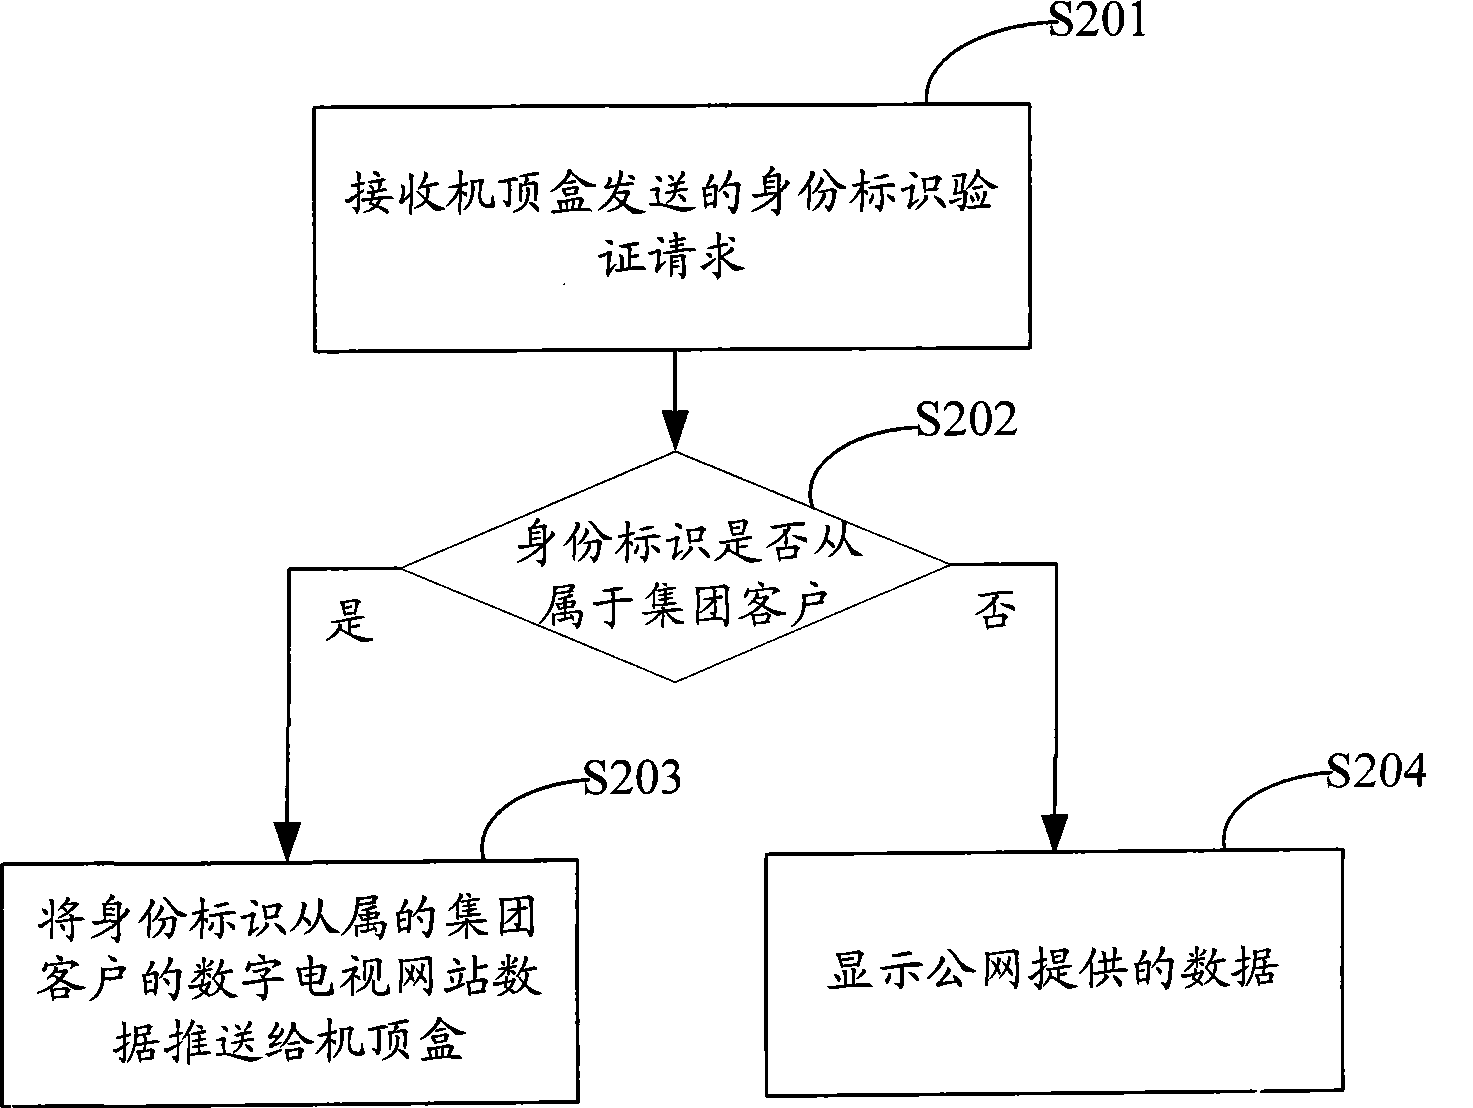 Digital television opening presenting method and system